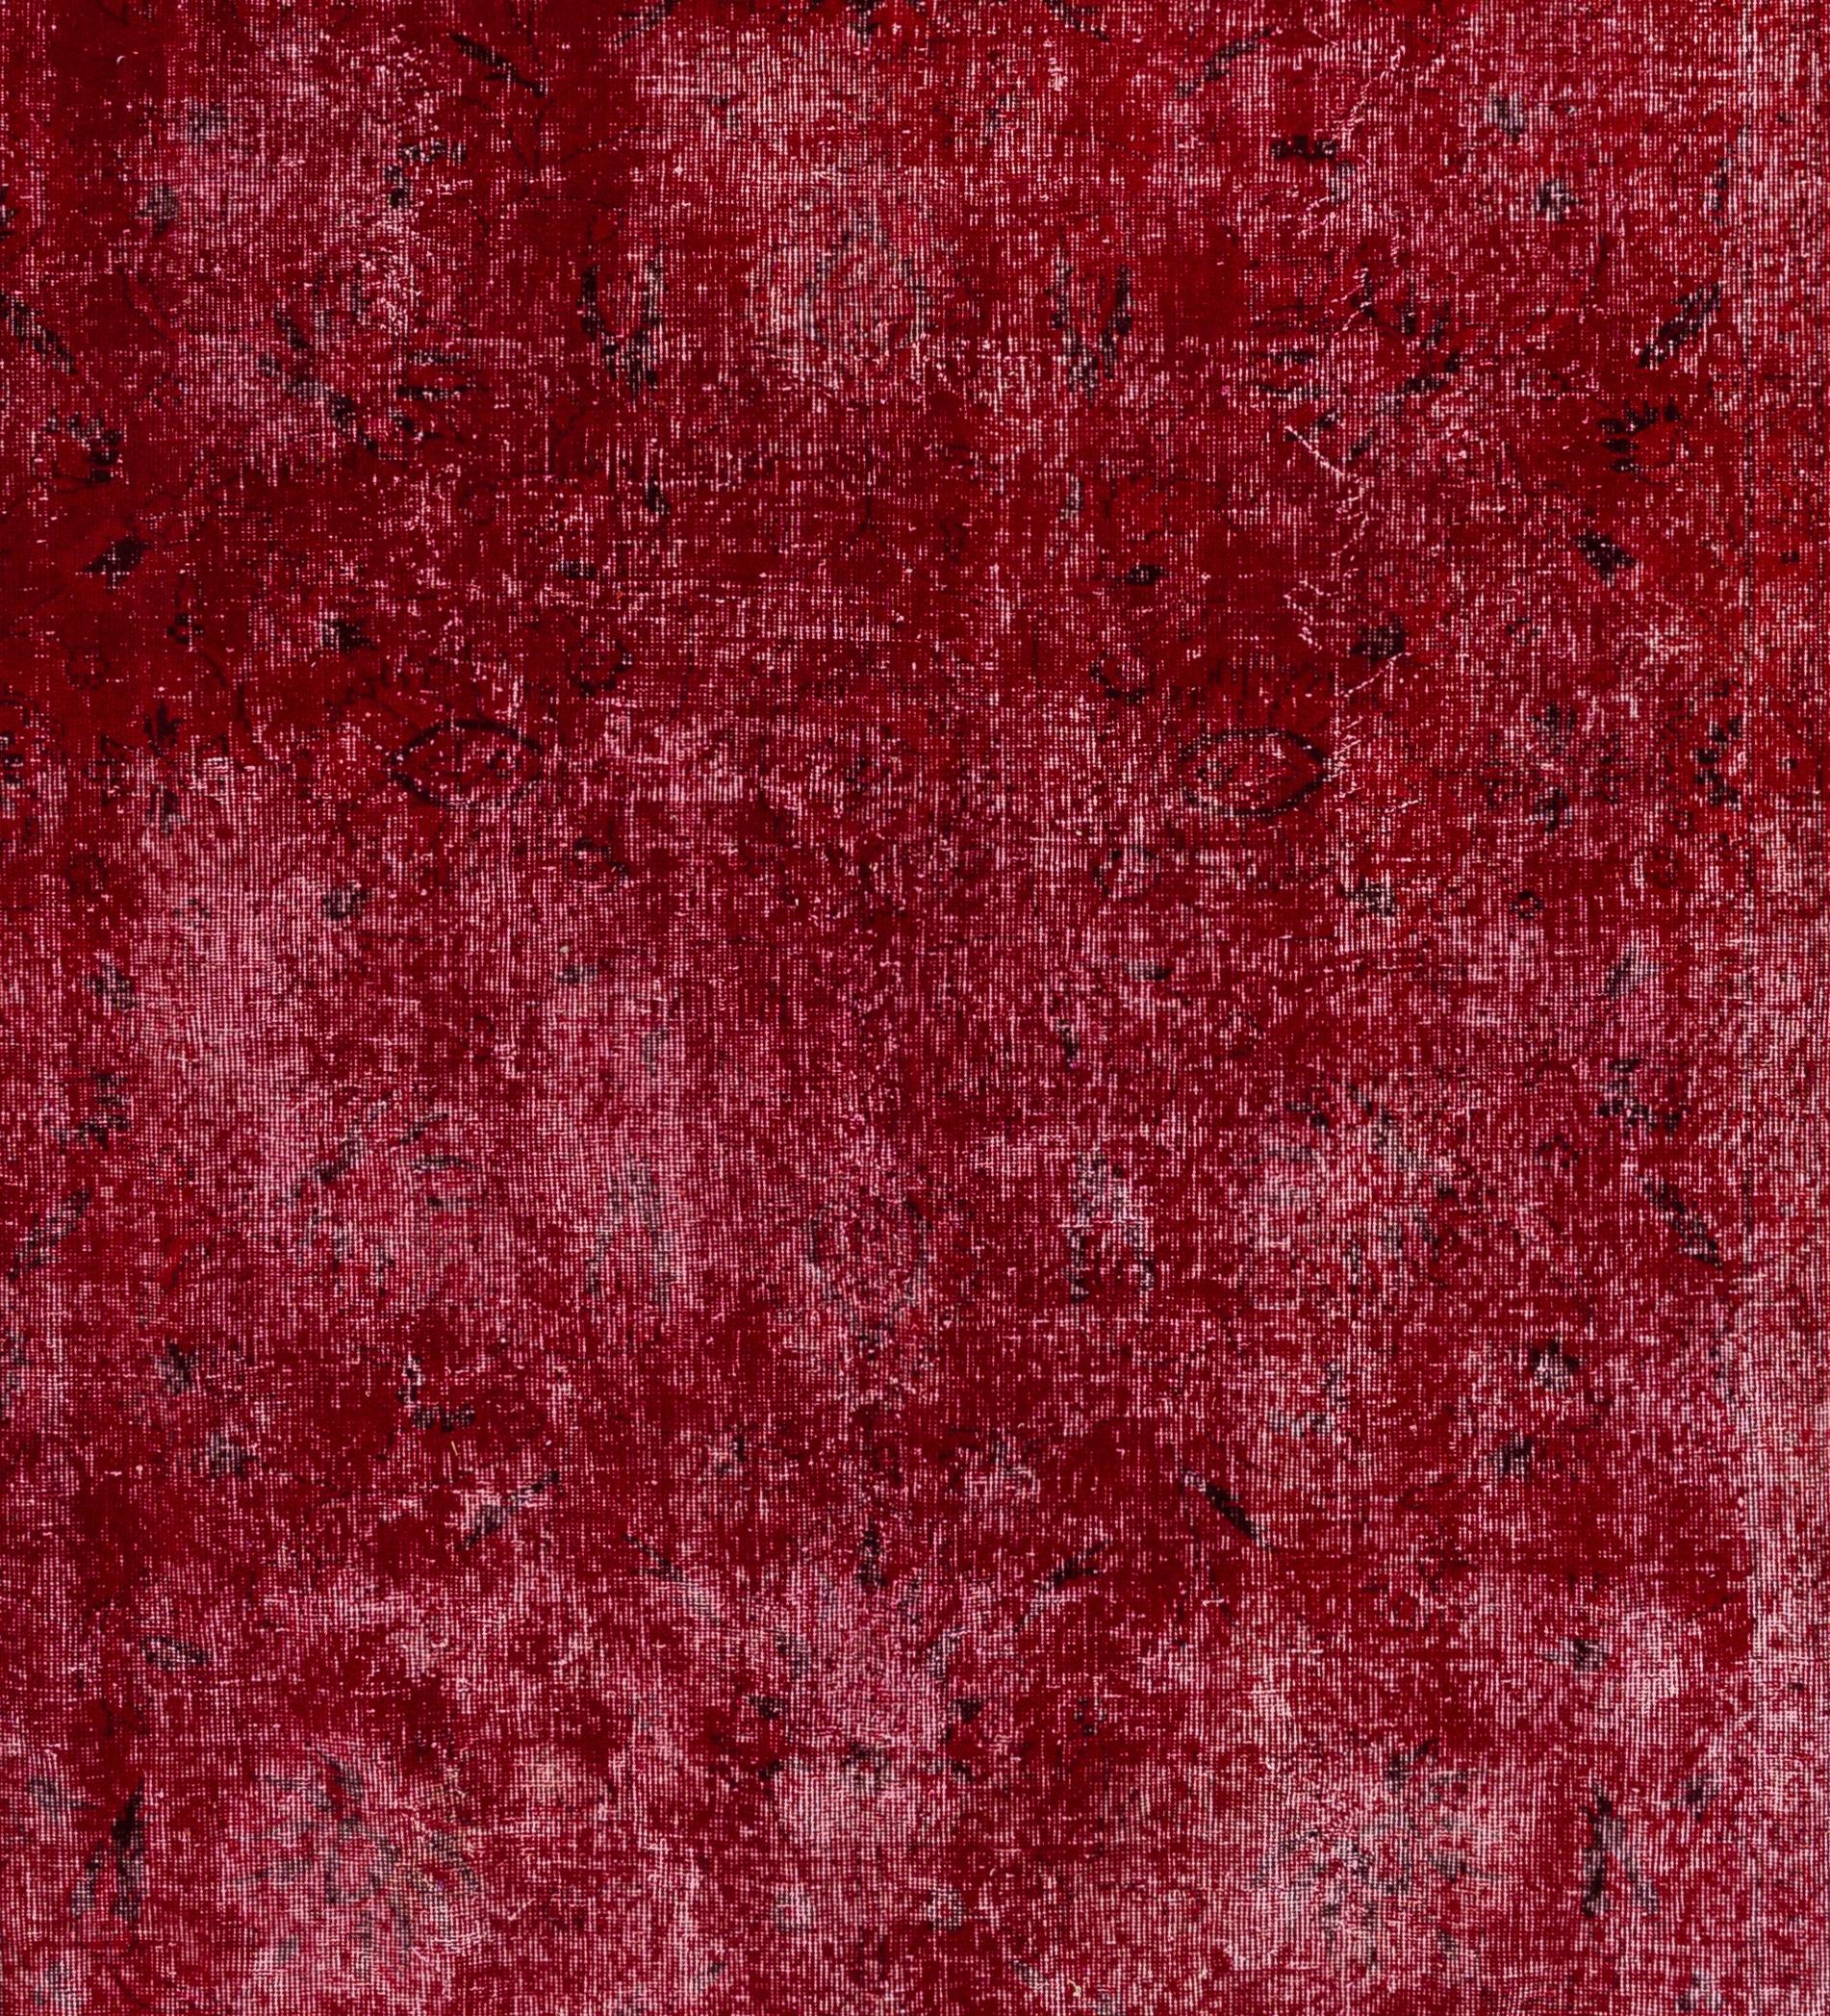 7.4x10 Ft Distressed Handmade Turkish Area Rug in Red 4 Modern Home and Office im Zustand „Gut“ im Angebot in Philadelphia, PA